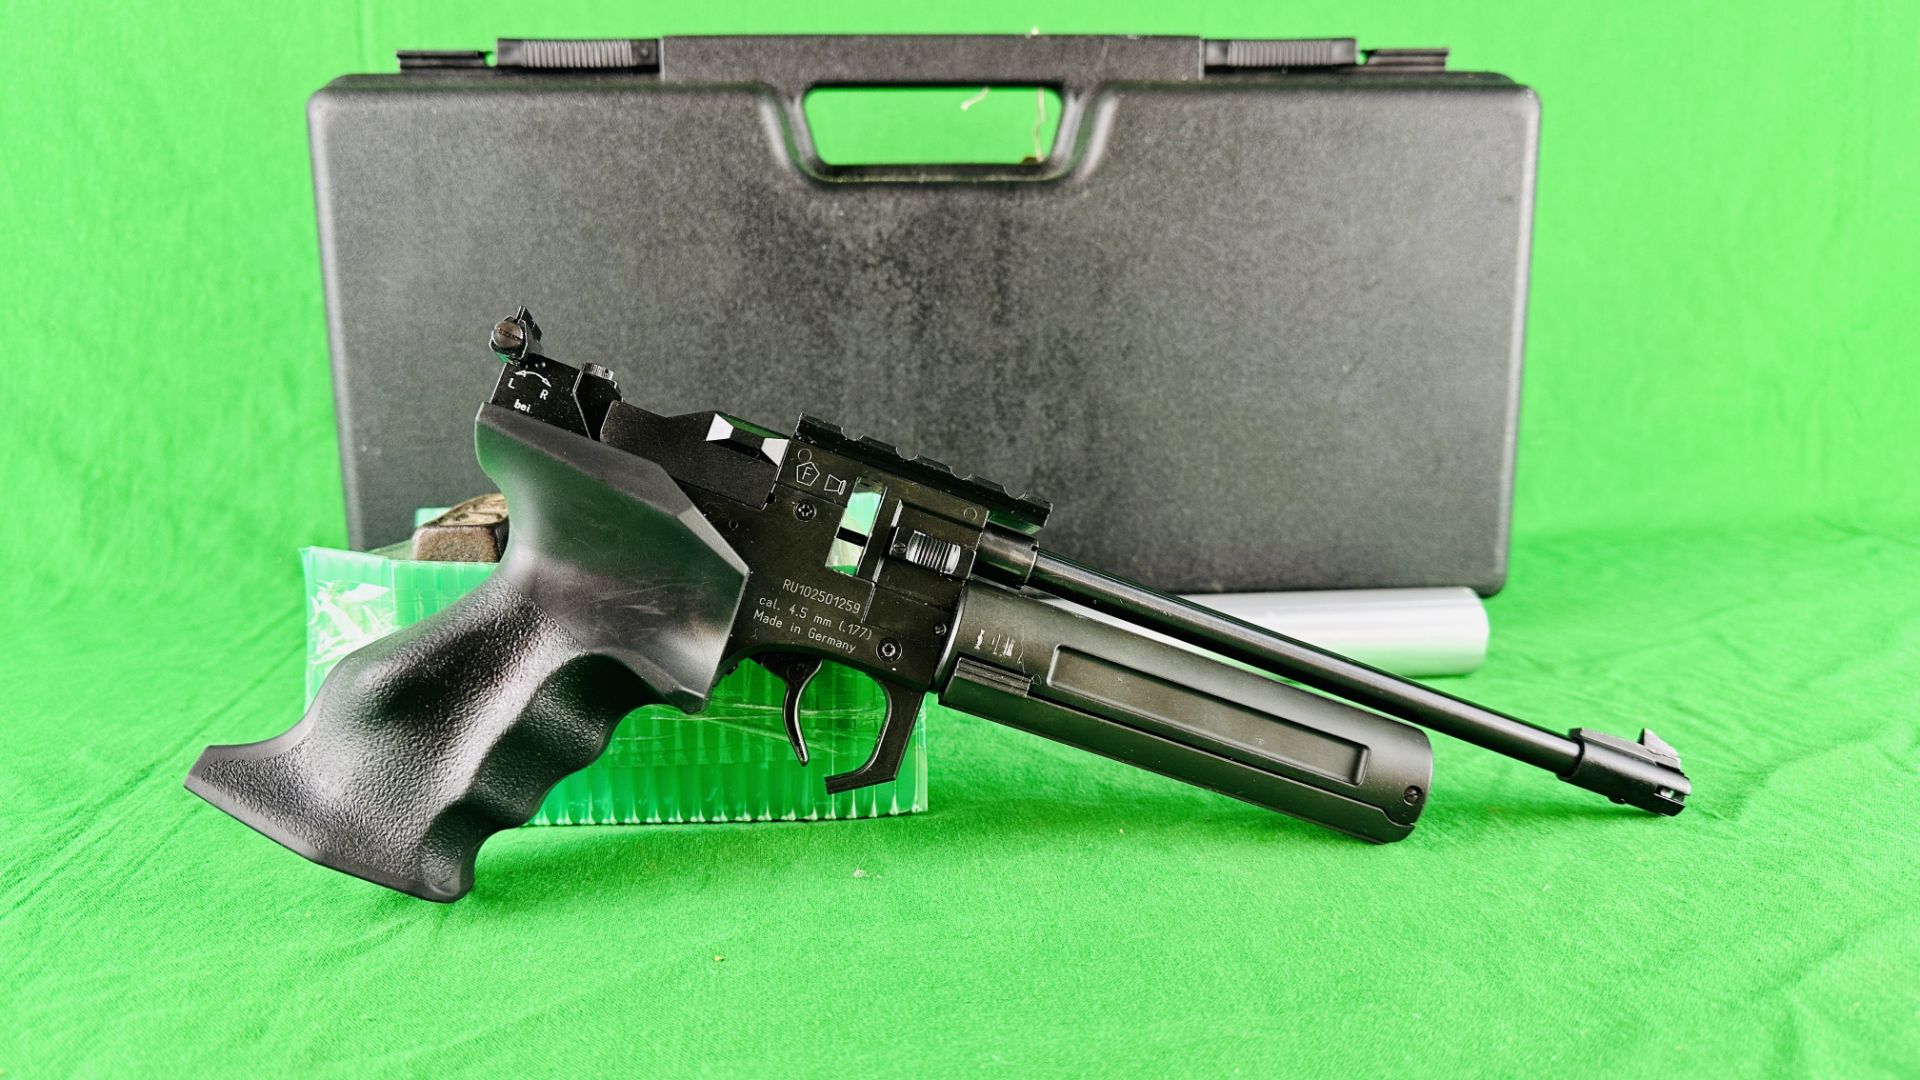 ROHM TWIN MASTER ACTION Co2 AIR PISTOL COMPLETE WITH ONE 8 SHOT MAGAZINE AND A ROHM SILENCER IN